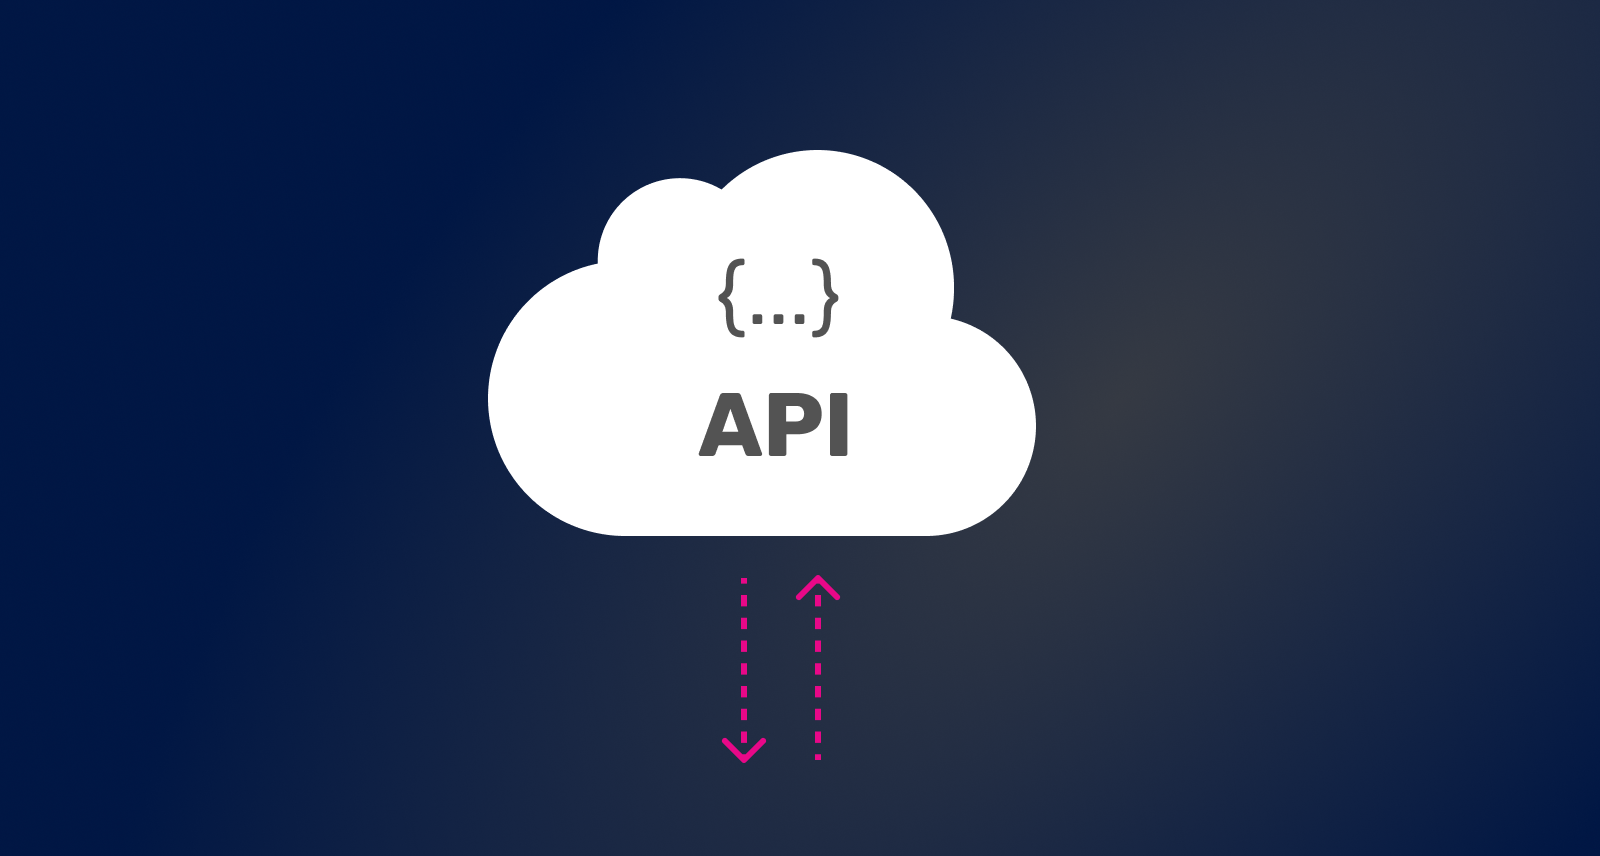 A cloud containing the word API. Below the cloud are two arrows